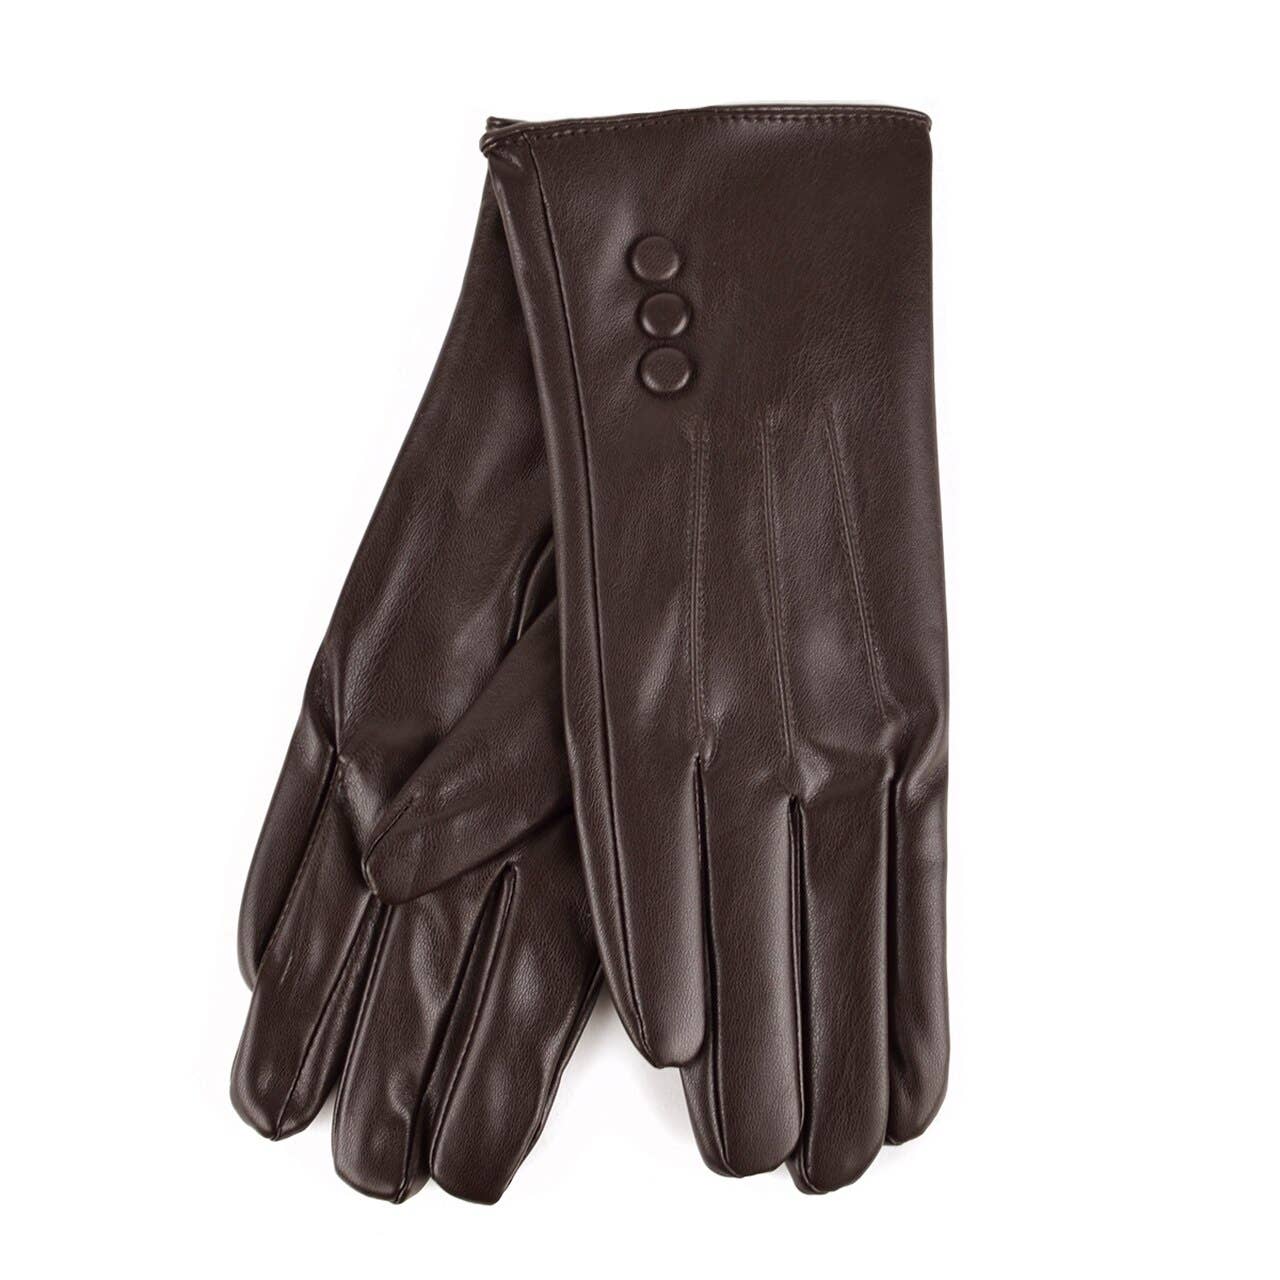 Women's PU Leather Winter Touch Screen Gloves: Brown / L/XL